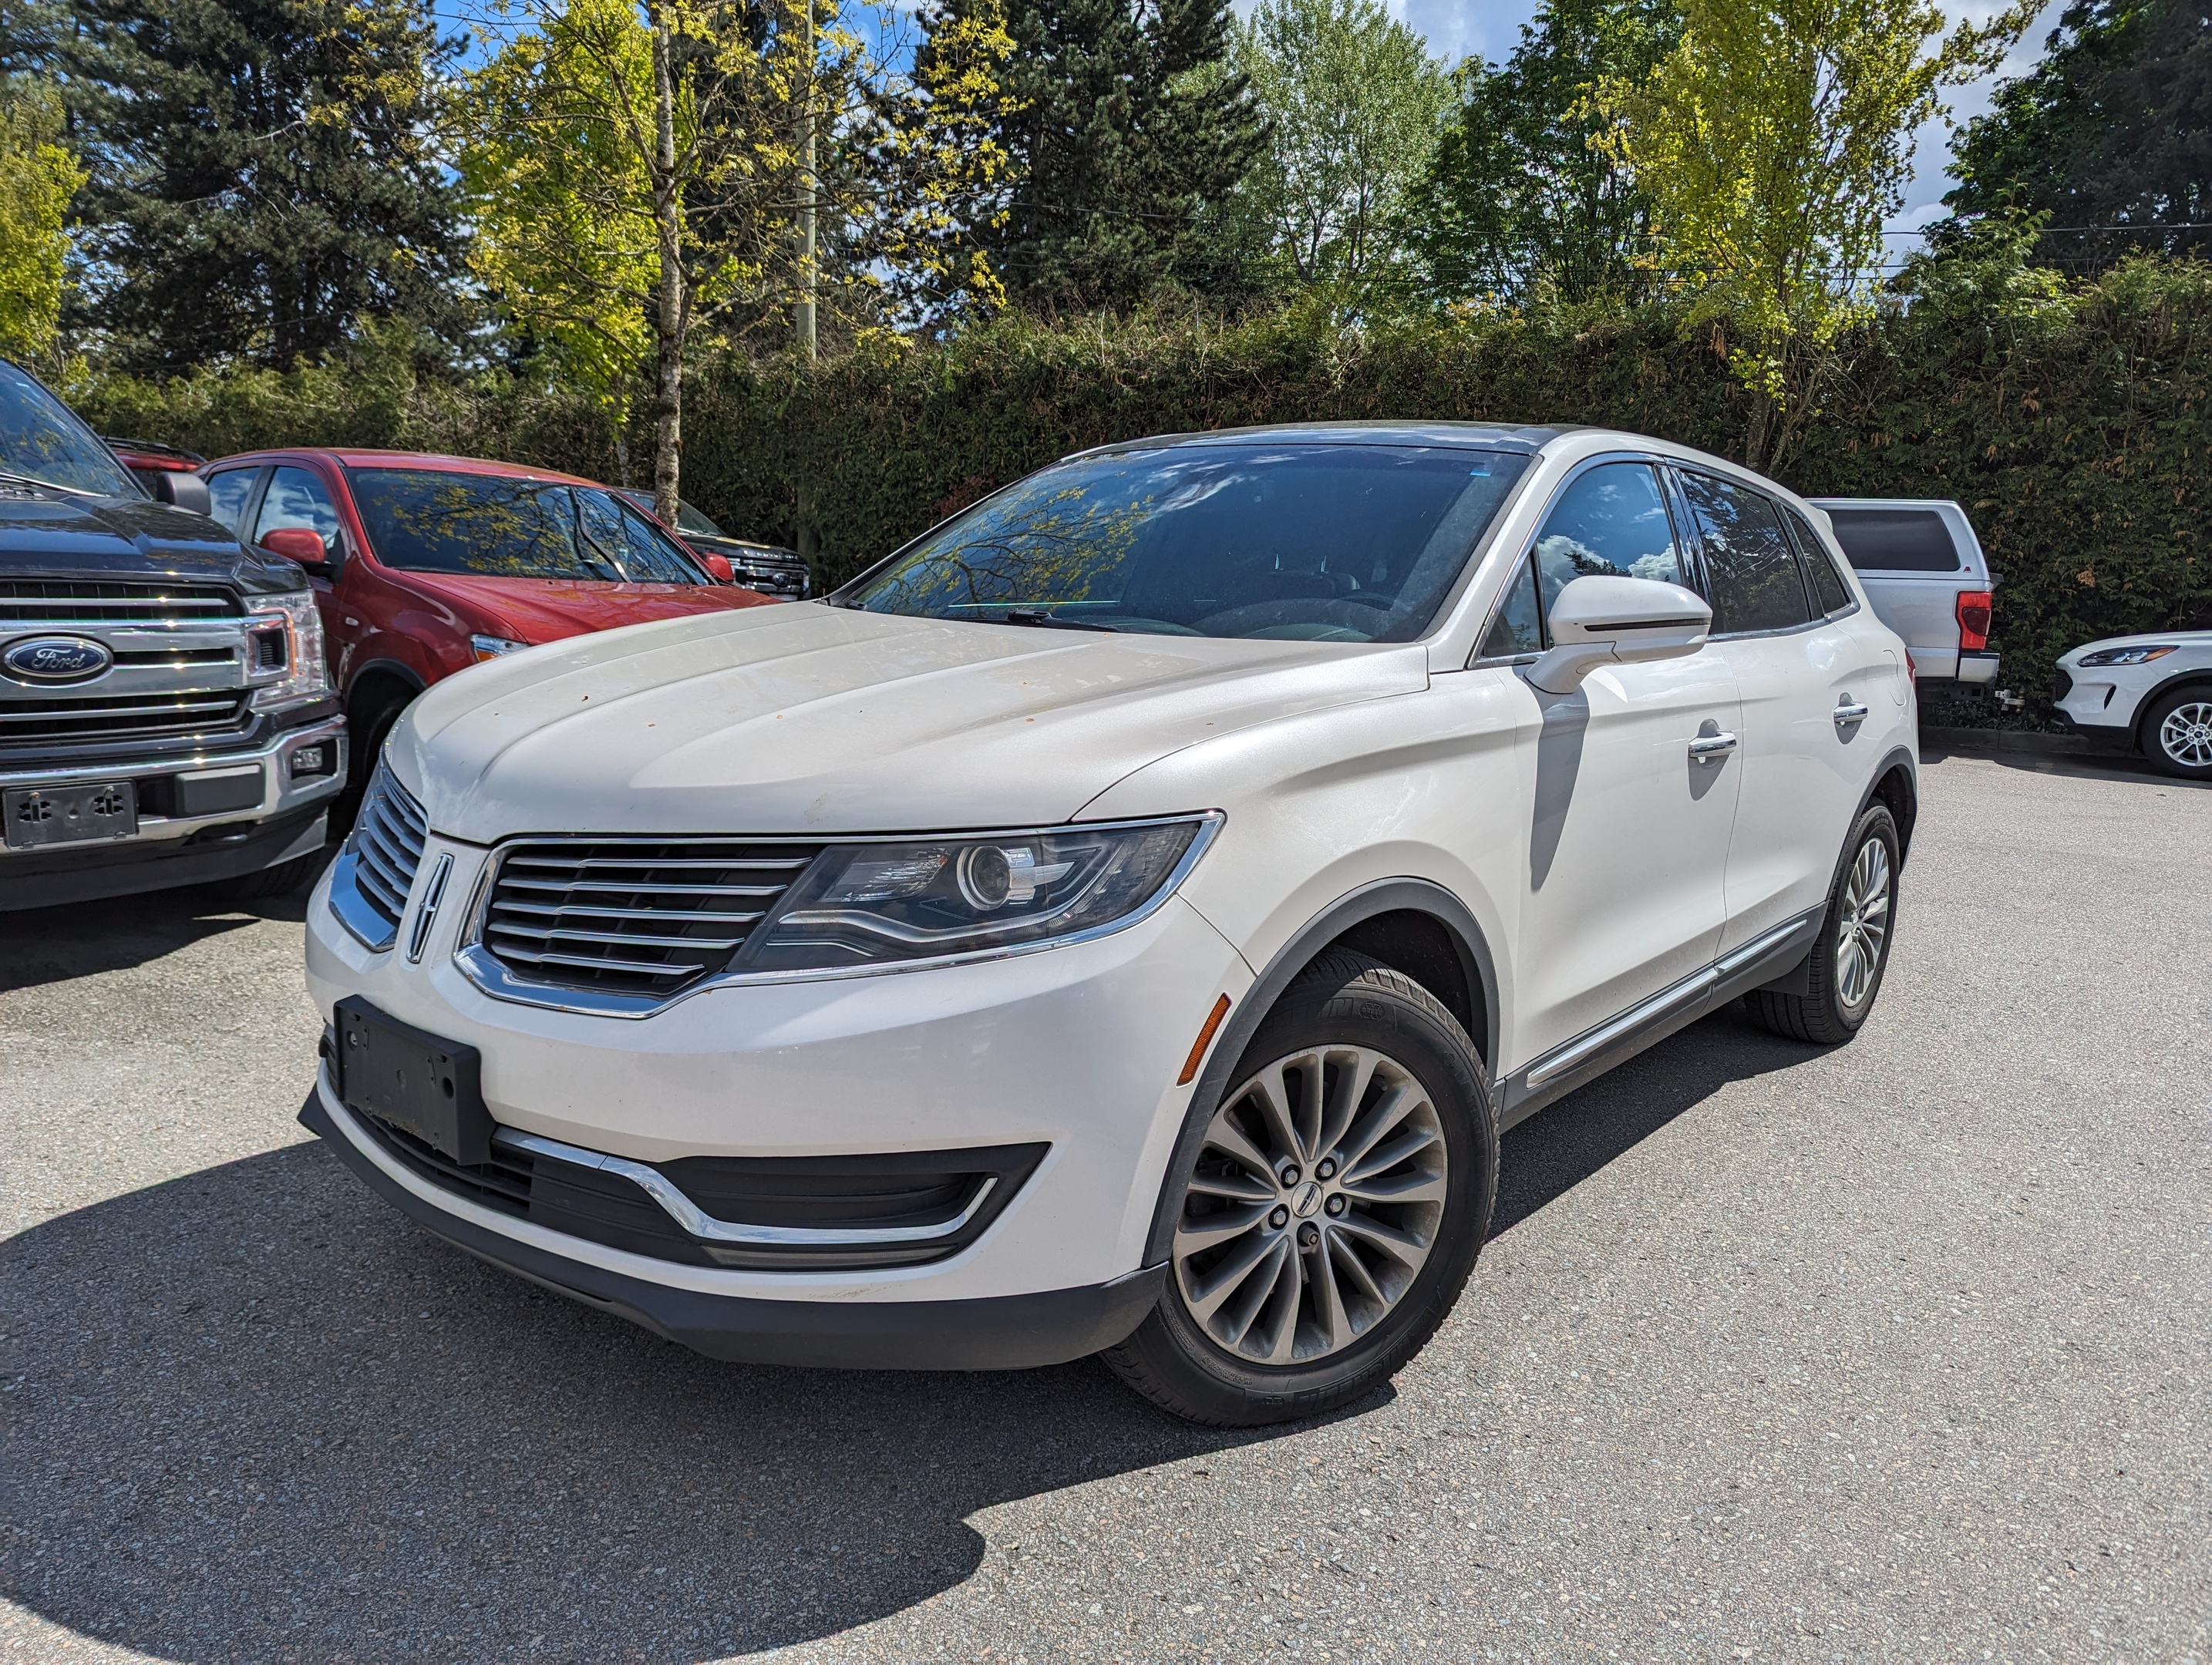 2016 Lincoln MKX Select AWD - Climate, Select Plus Pkgs